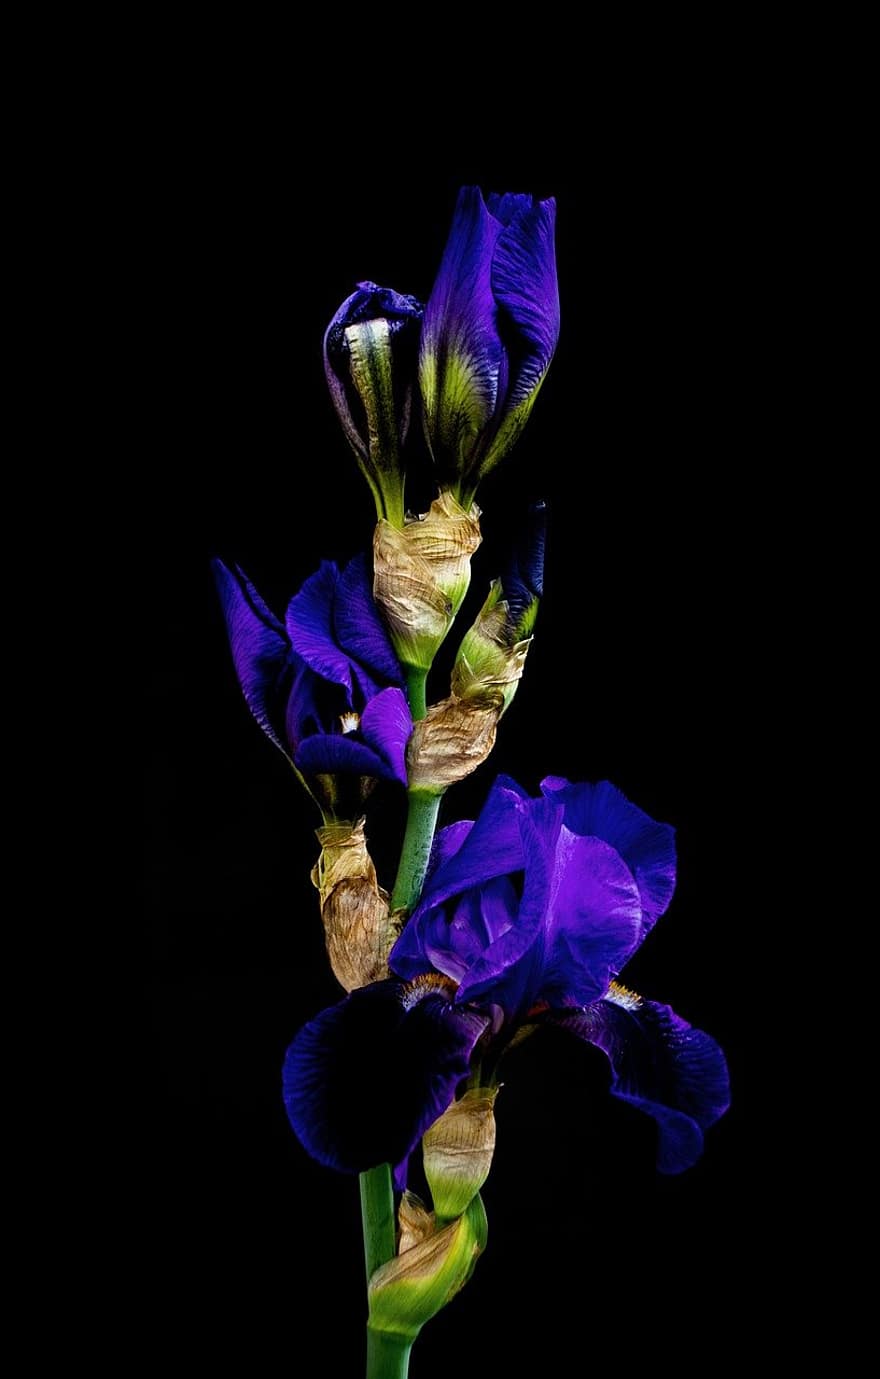 Flowers, Iris, Blue Flowers, The Buds, Botany, Flora, Background, Wallpaper, Nature, Minimalism, Contrast